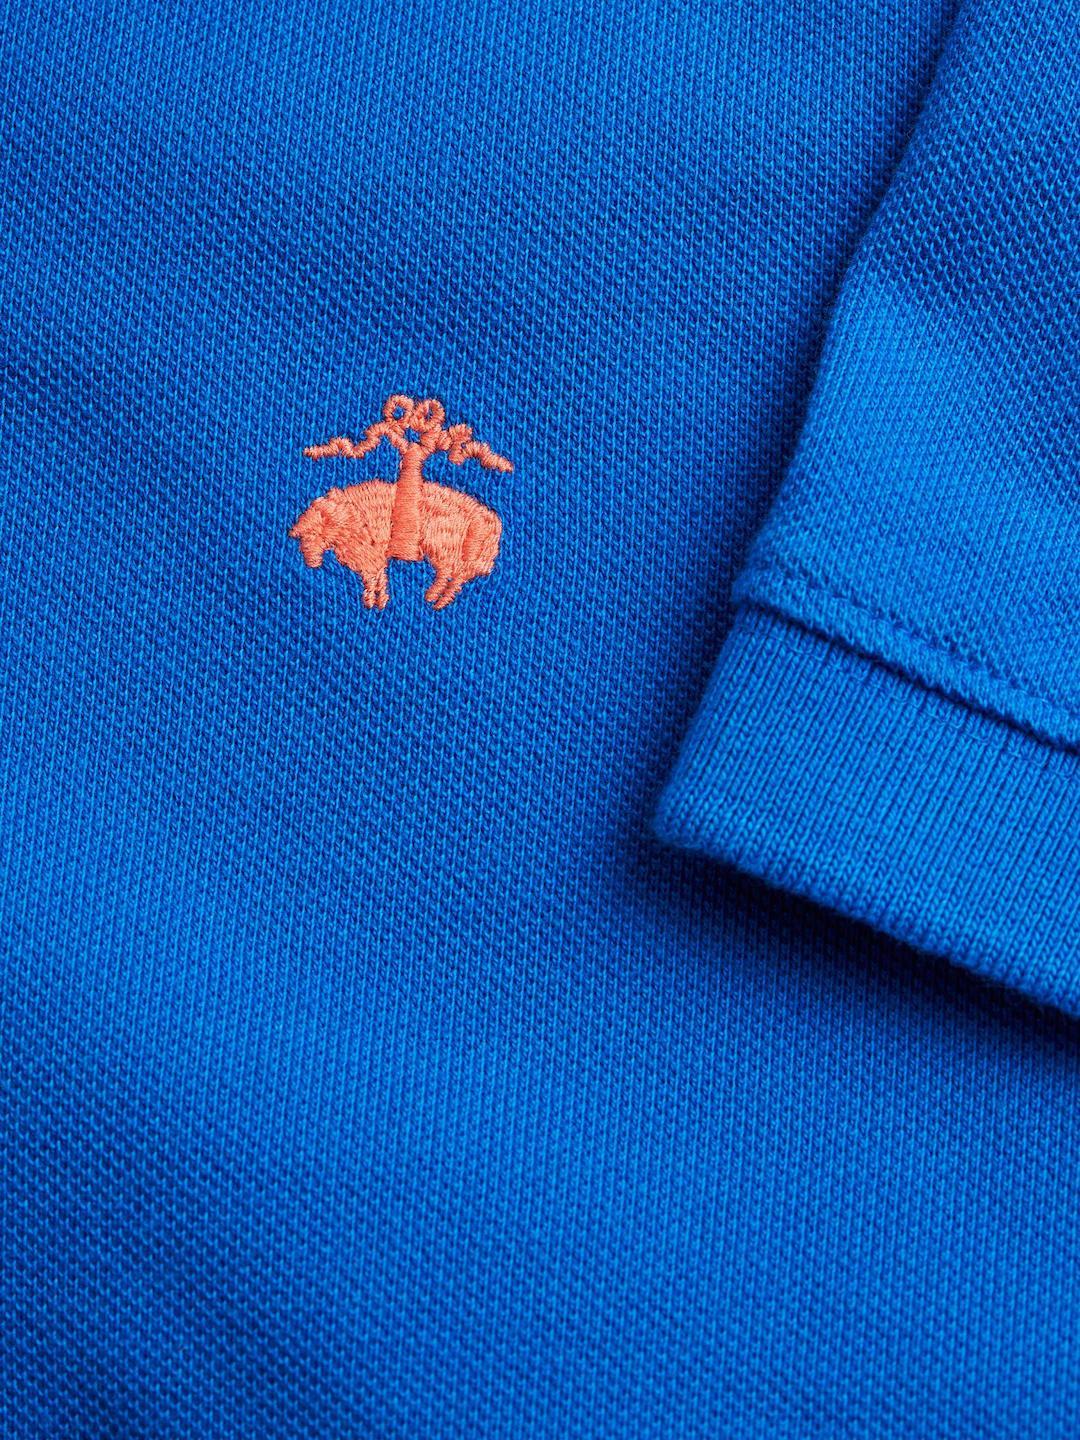 Blue Brooks Brothers Logo - Brooks Brothers Embroidered Logo Cotton Slim Fit Polo in Blue